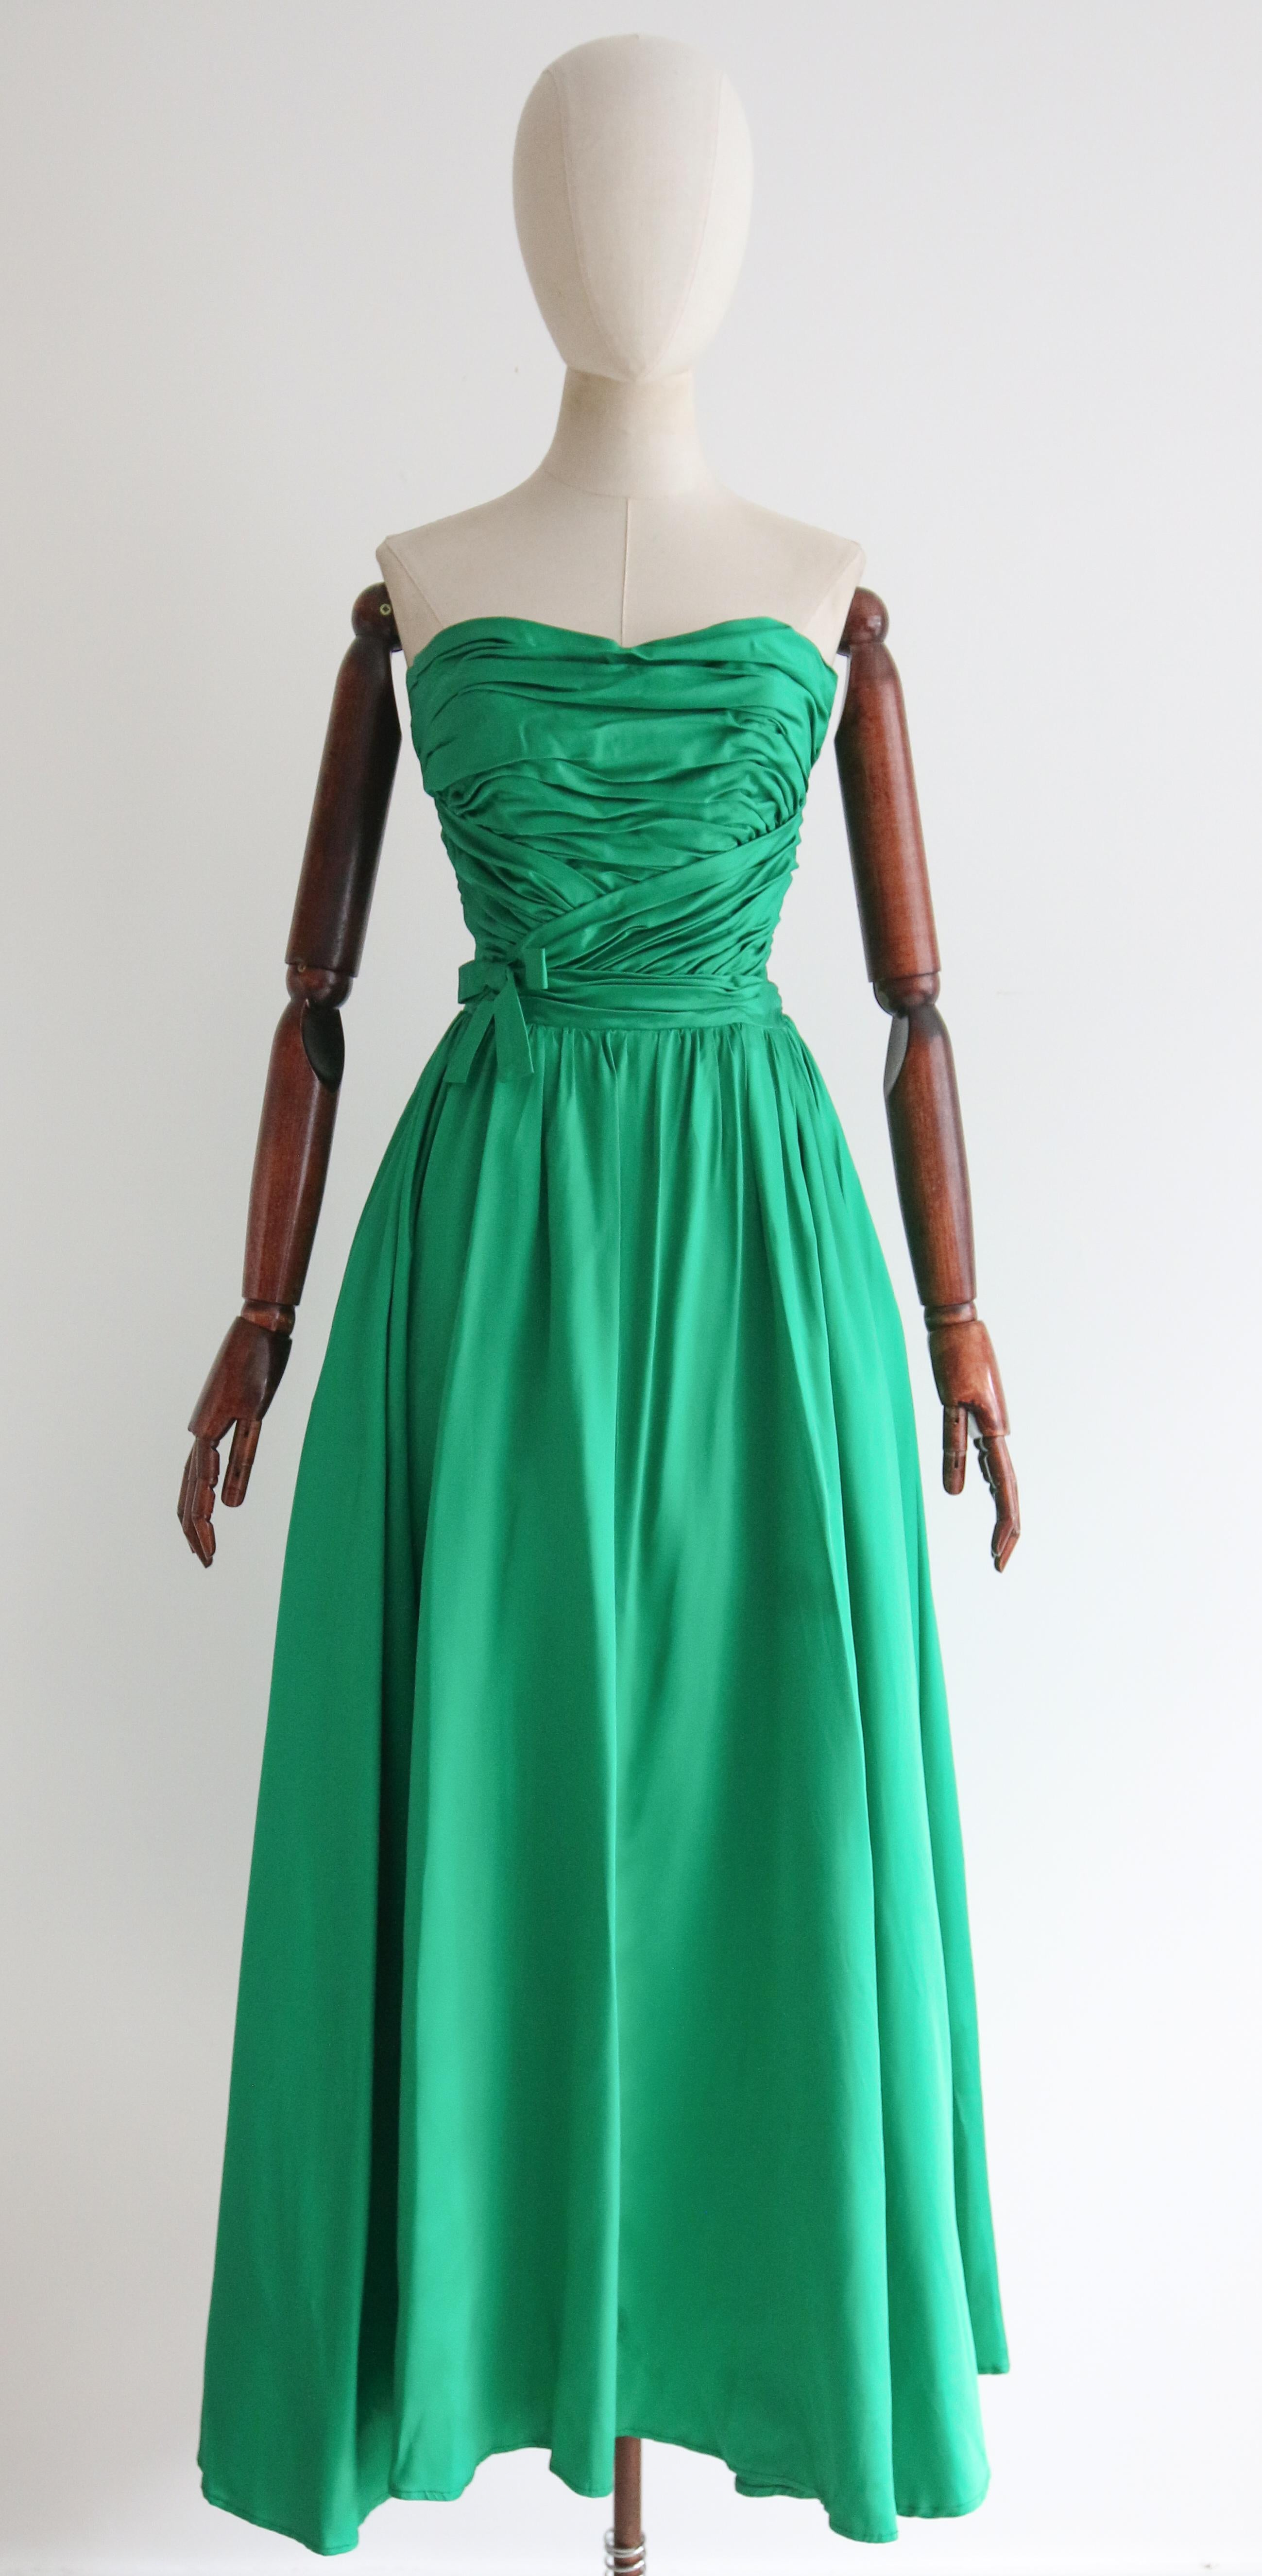 This breathtaking 1950's duchess satin gown, in the most eye-catching shade of emerald green, accented by gathered pleats and a decorative bow, is the perfect piece for that special occasion. 

The strapless neckline of the dress, is set off by a